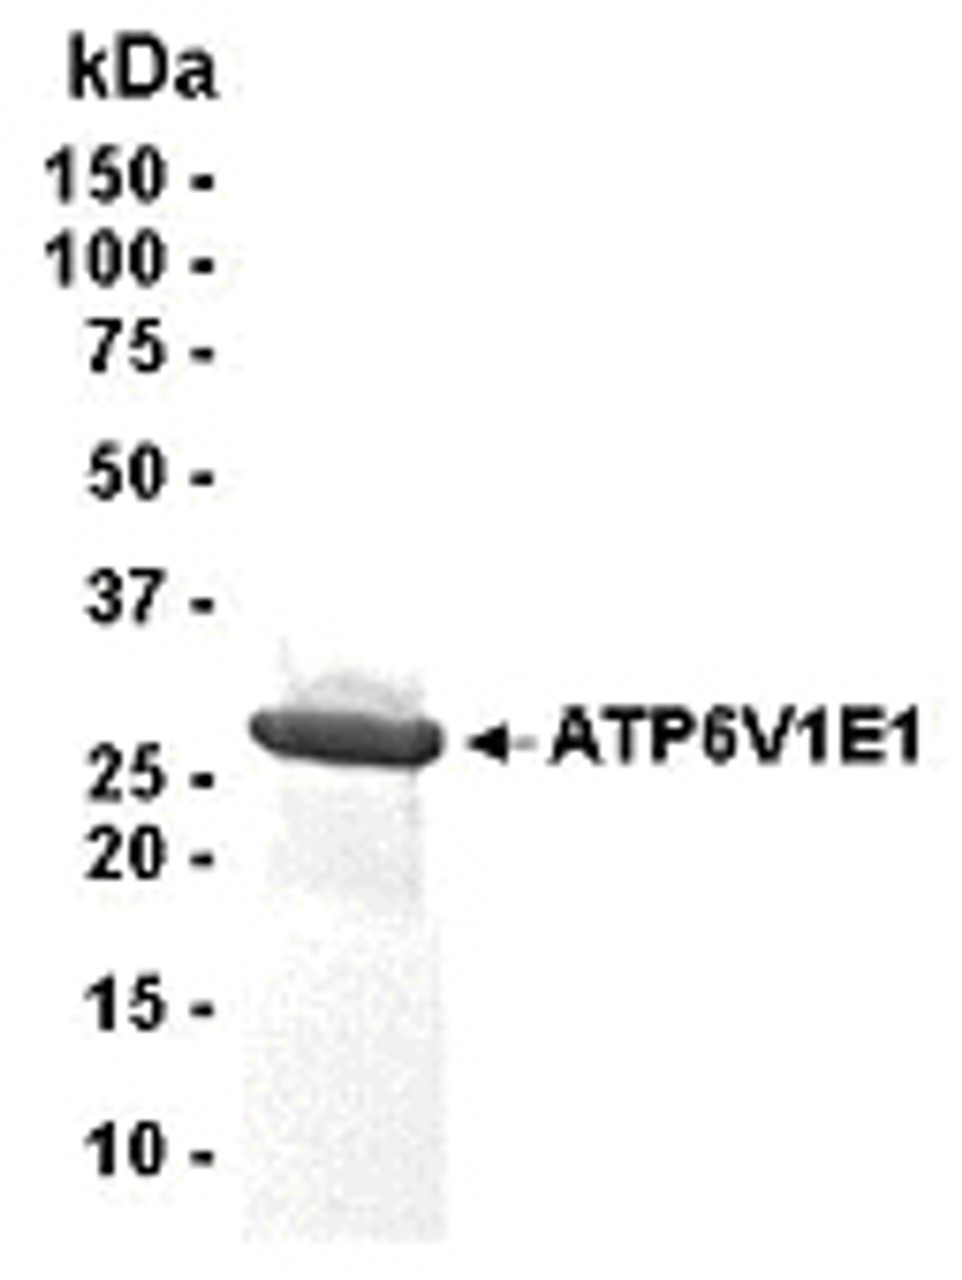 SDS PAGE: Analysis of ATP6V1E1 Recombinant Protein. 4-20% SDS gradient gel. Coomassie blue staining.